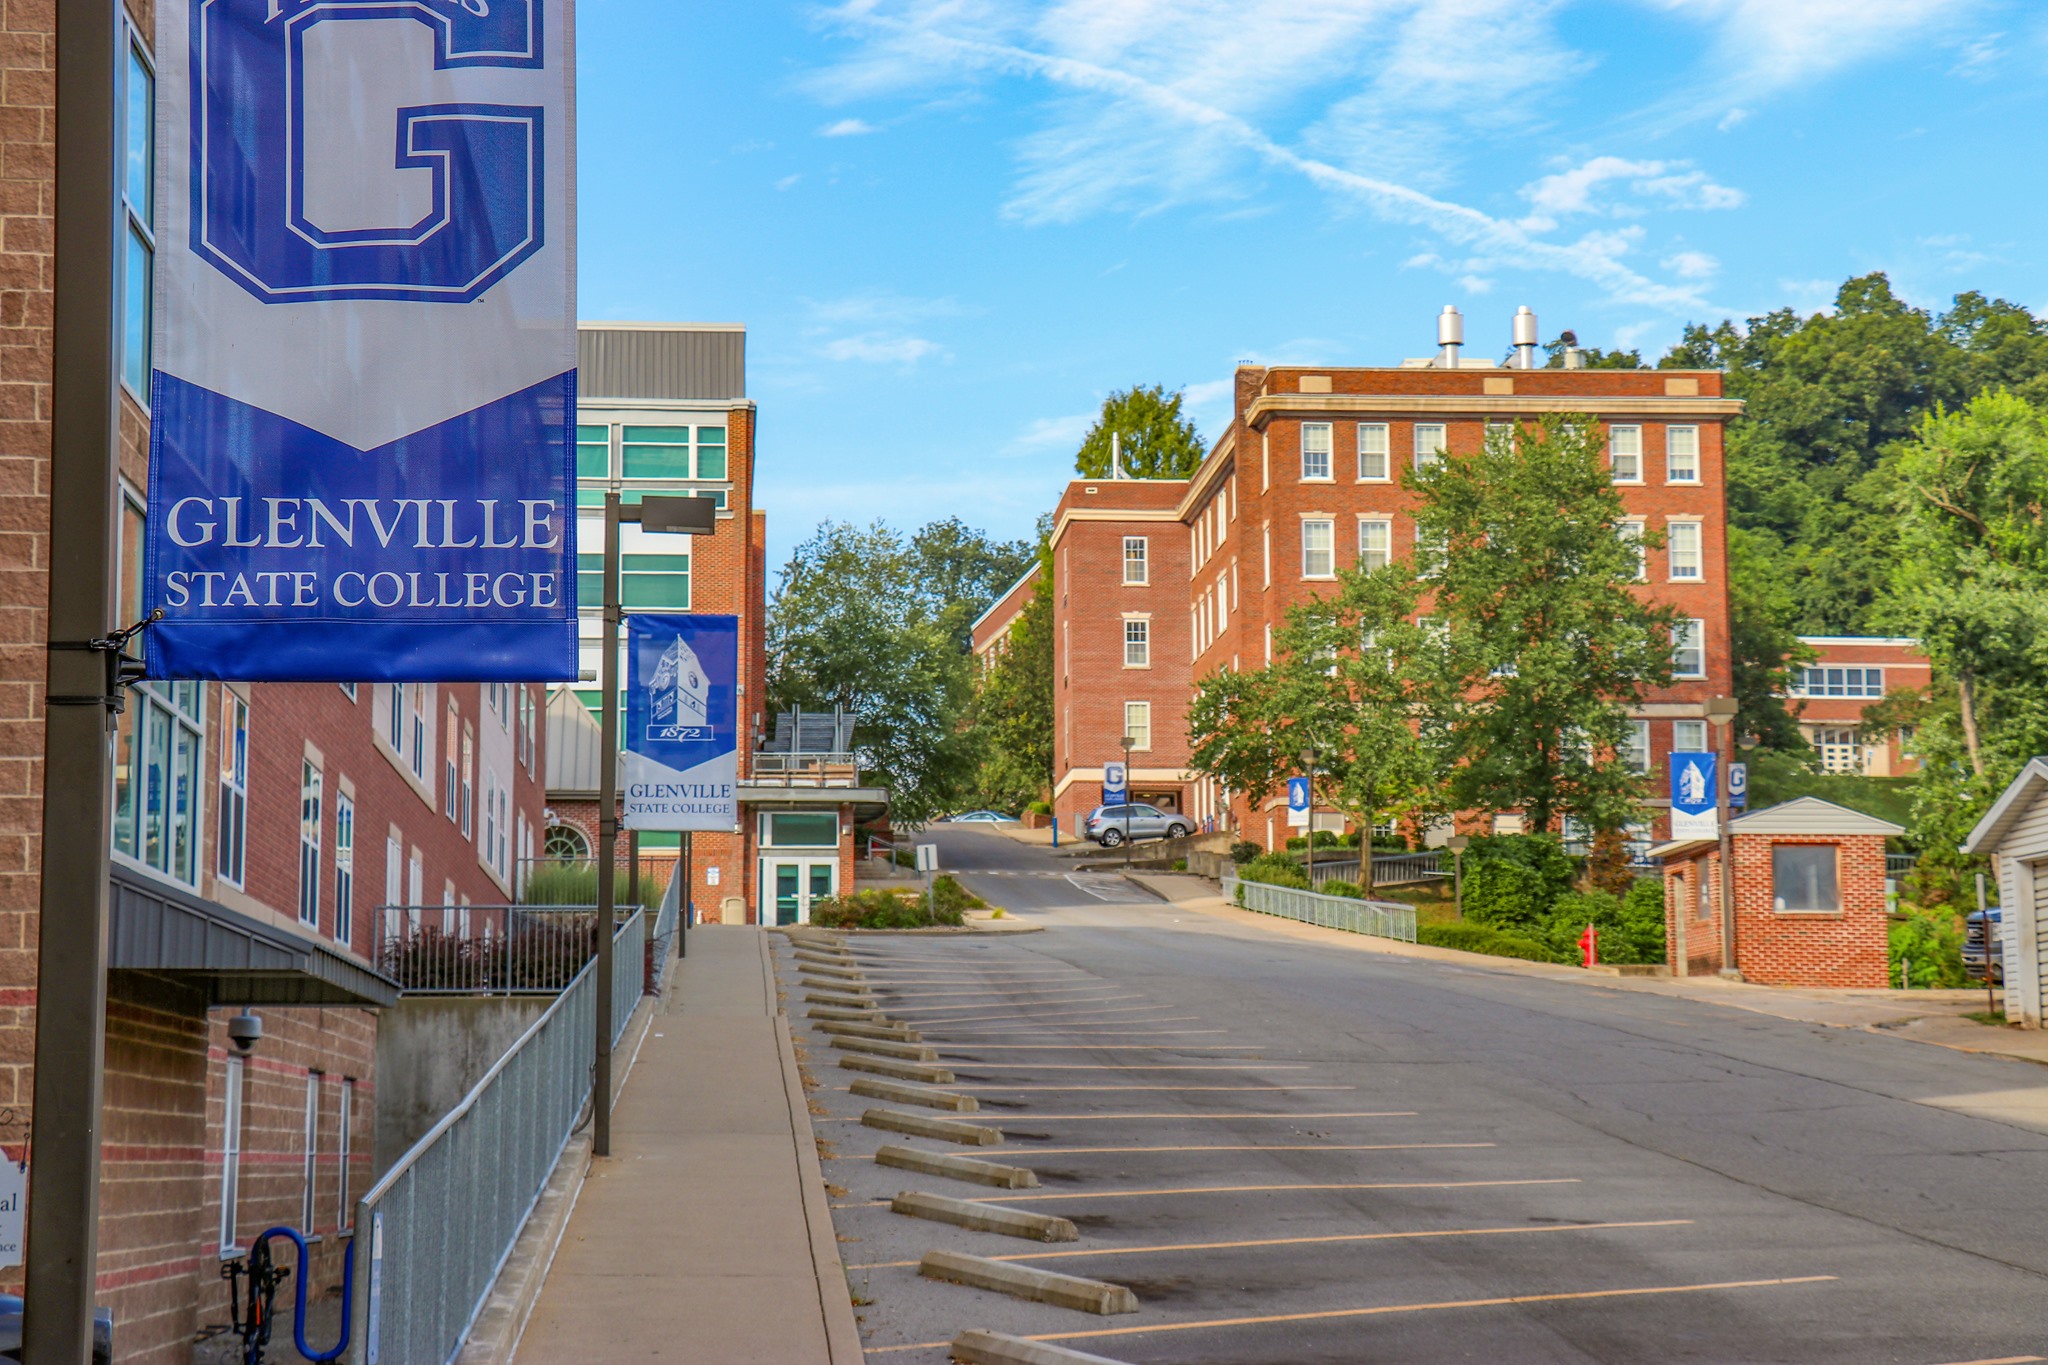 A view of campus from just outside of Goodwin Hall. The shot shows the main street, lined with bright blue GSC banners. It's a bright summer day.